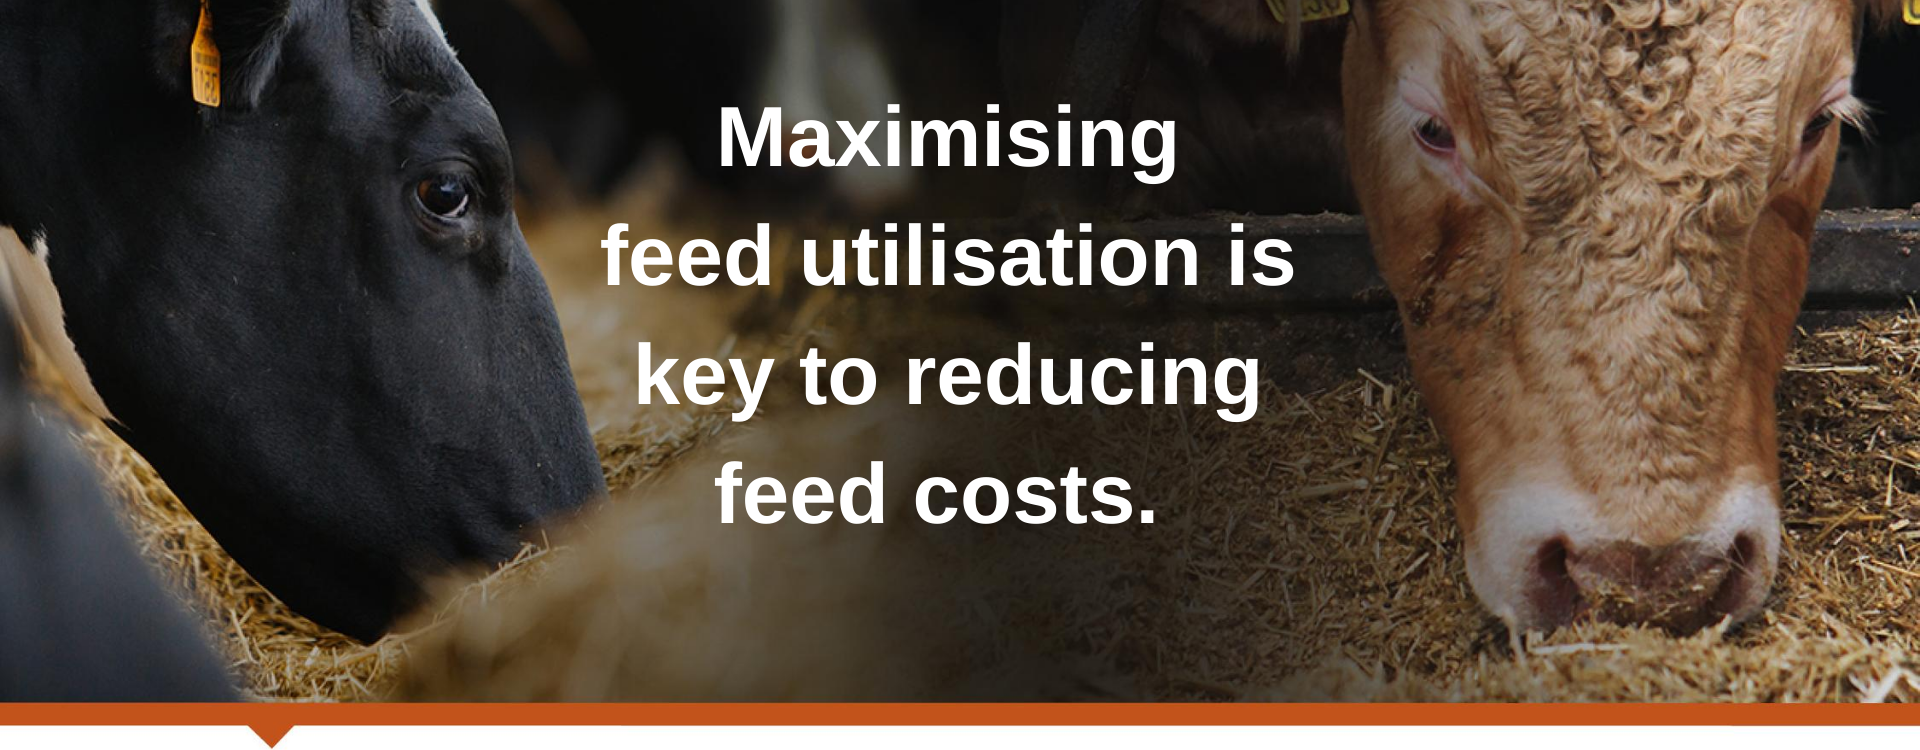 Undigested feed means wasted performance